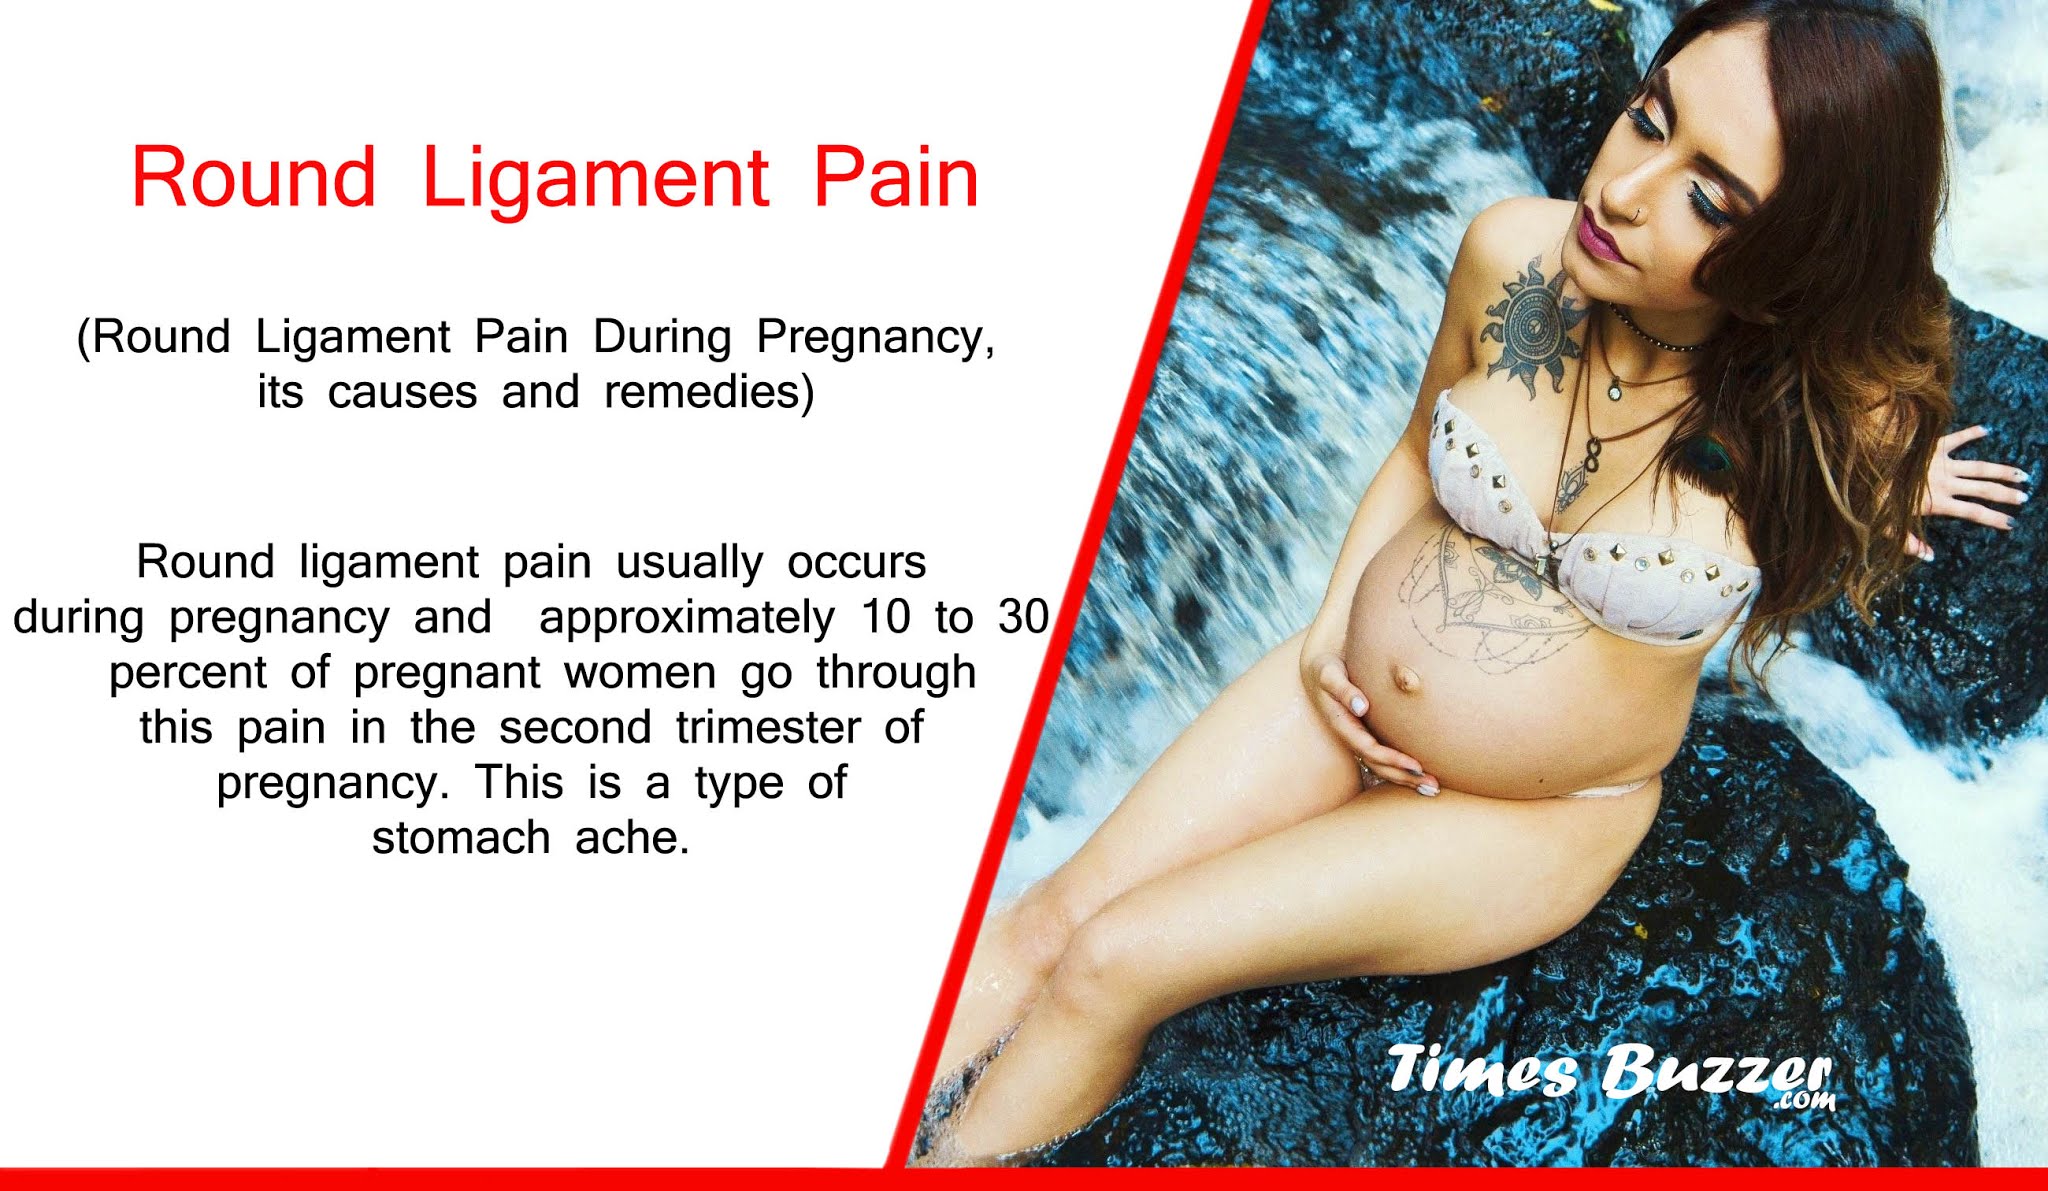 Round Ligament Pain During Pregnancy